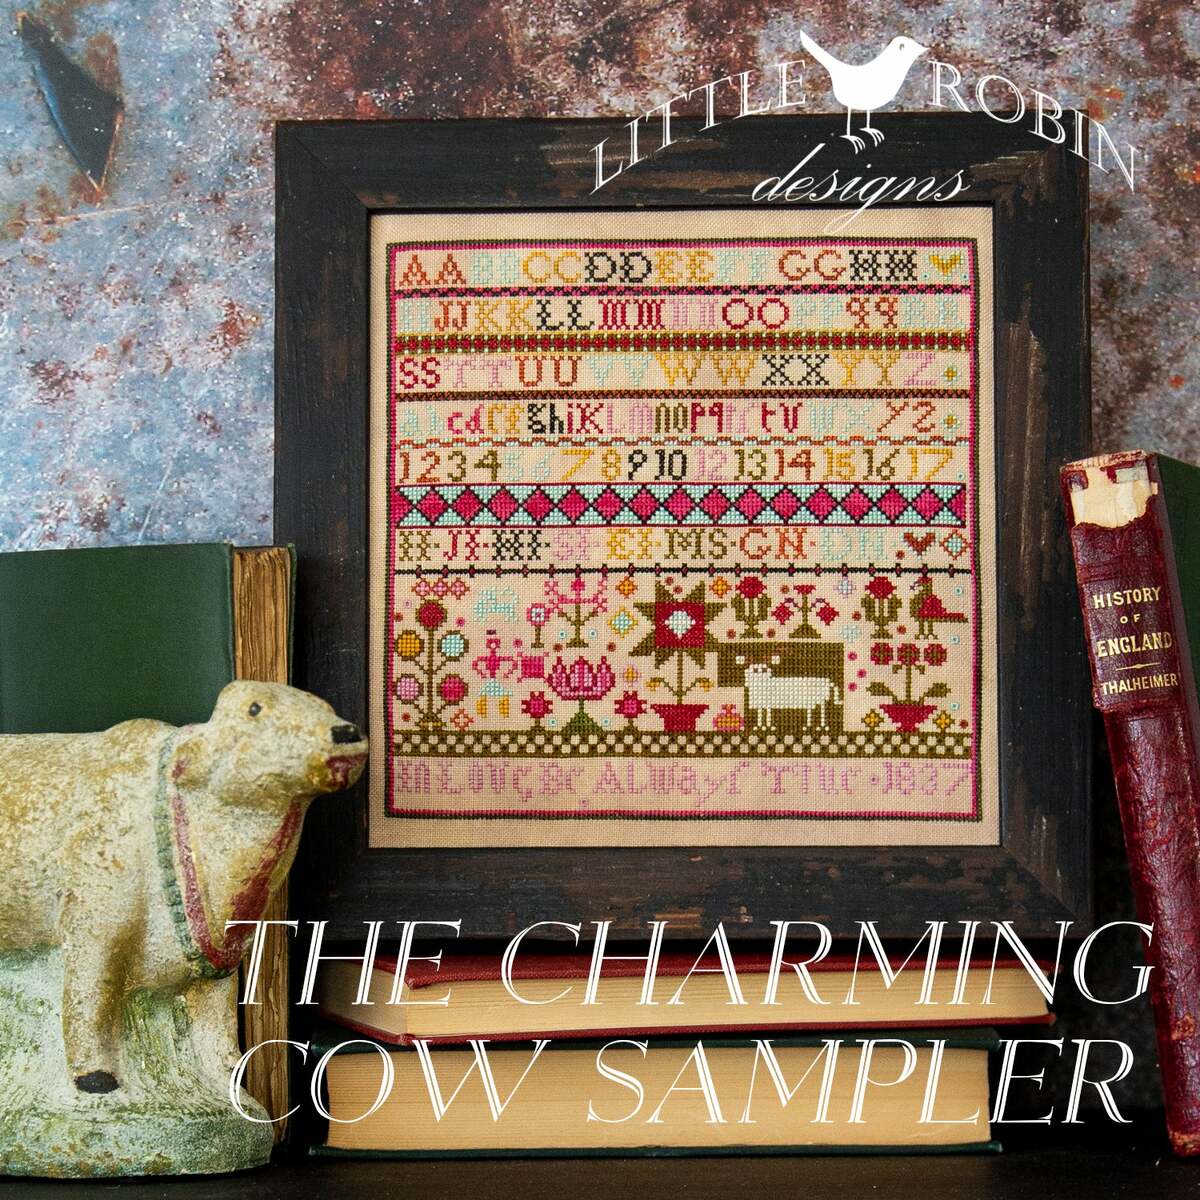 The Charming Cow Sampler